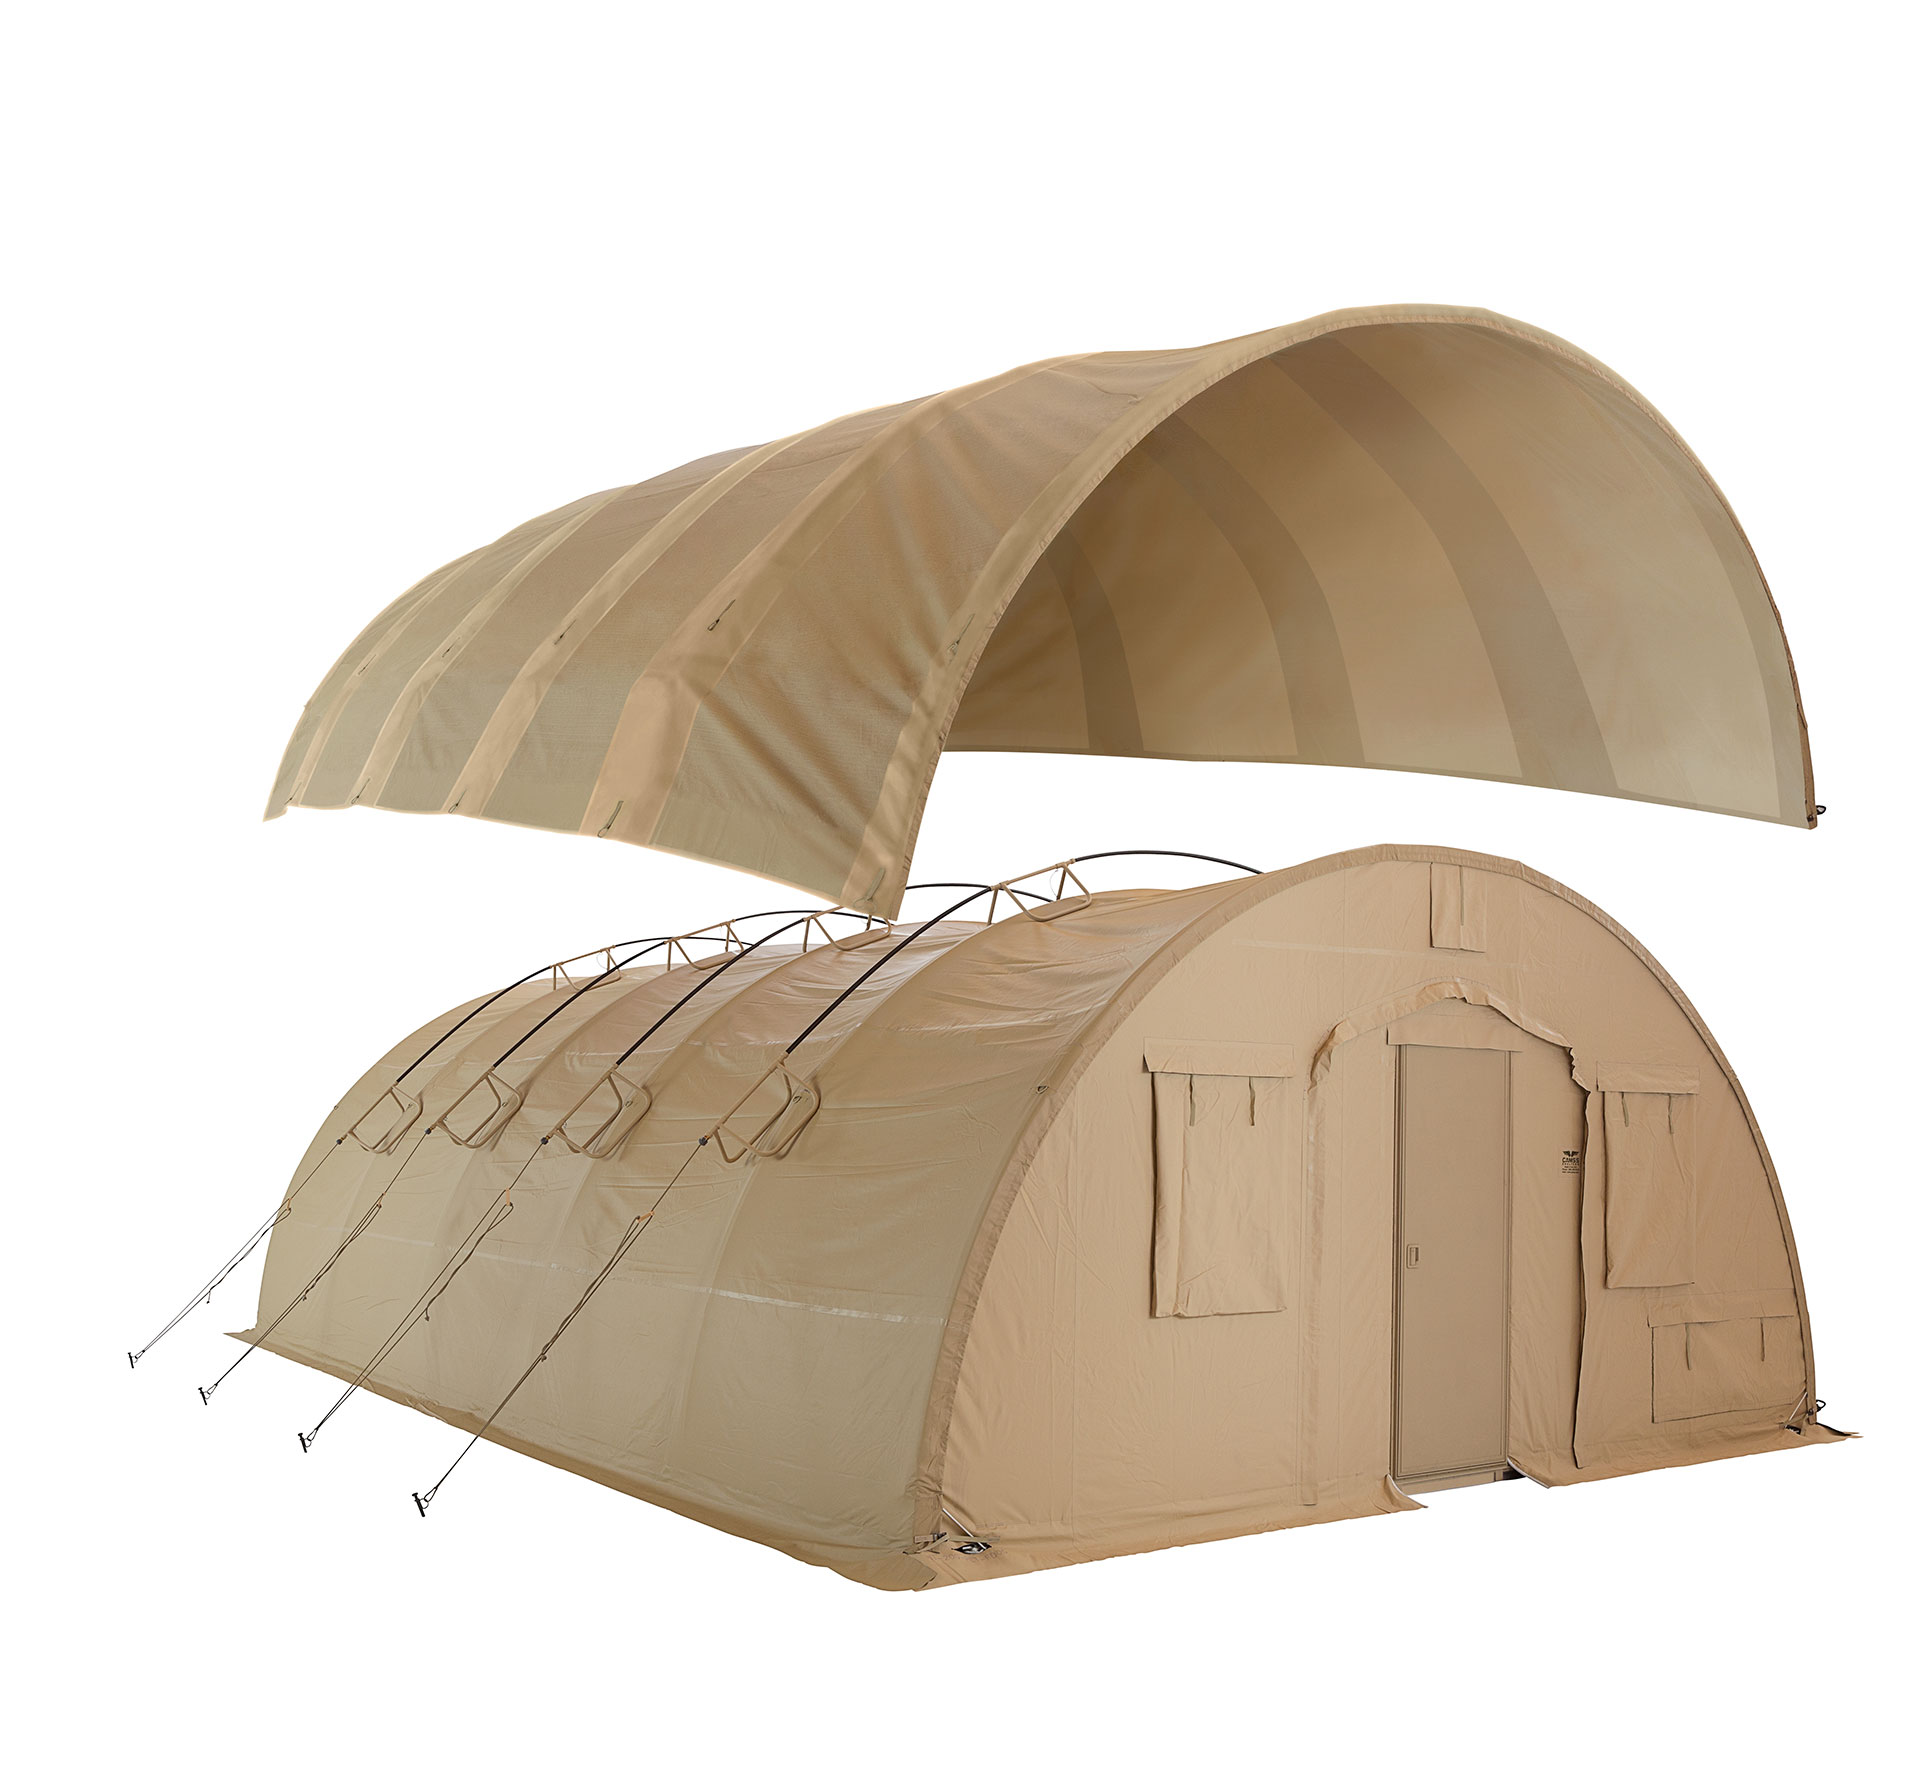 CAMSS Tan A1 20Q Military Shelter with SolarFly Pictured Above Military Shelter